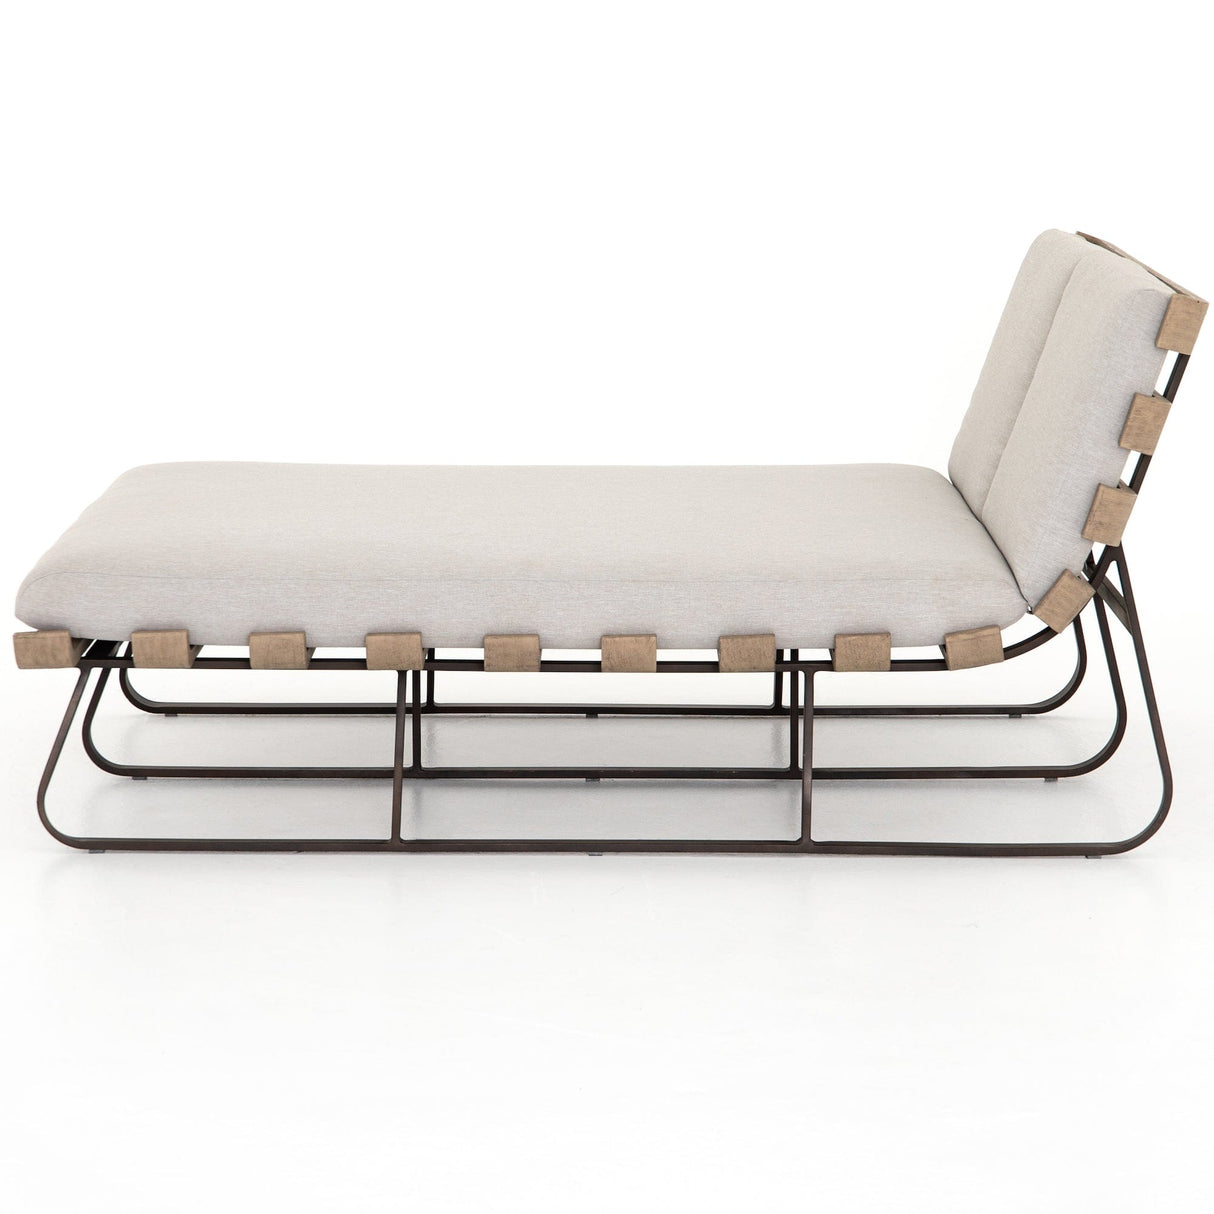 Four Hands Dimitri Outdoor Double Chaise Lounge Furniture